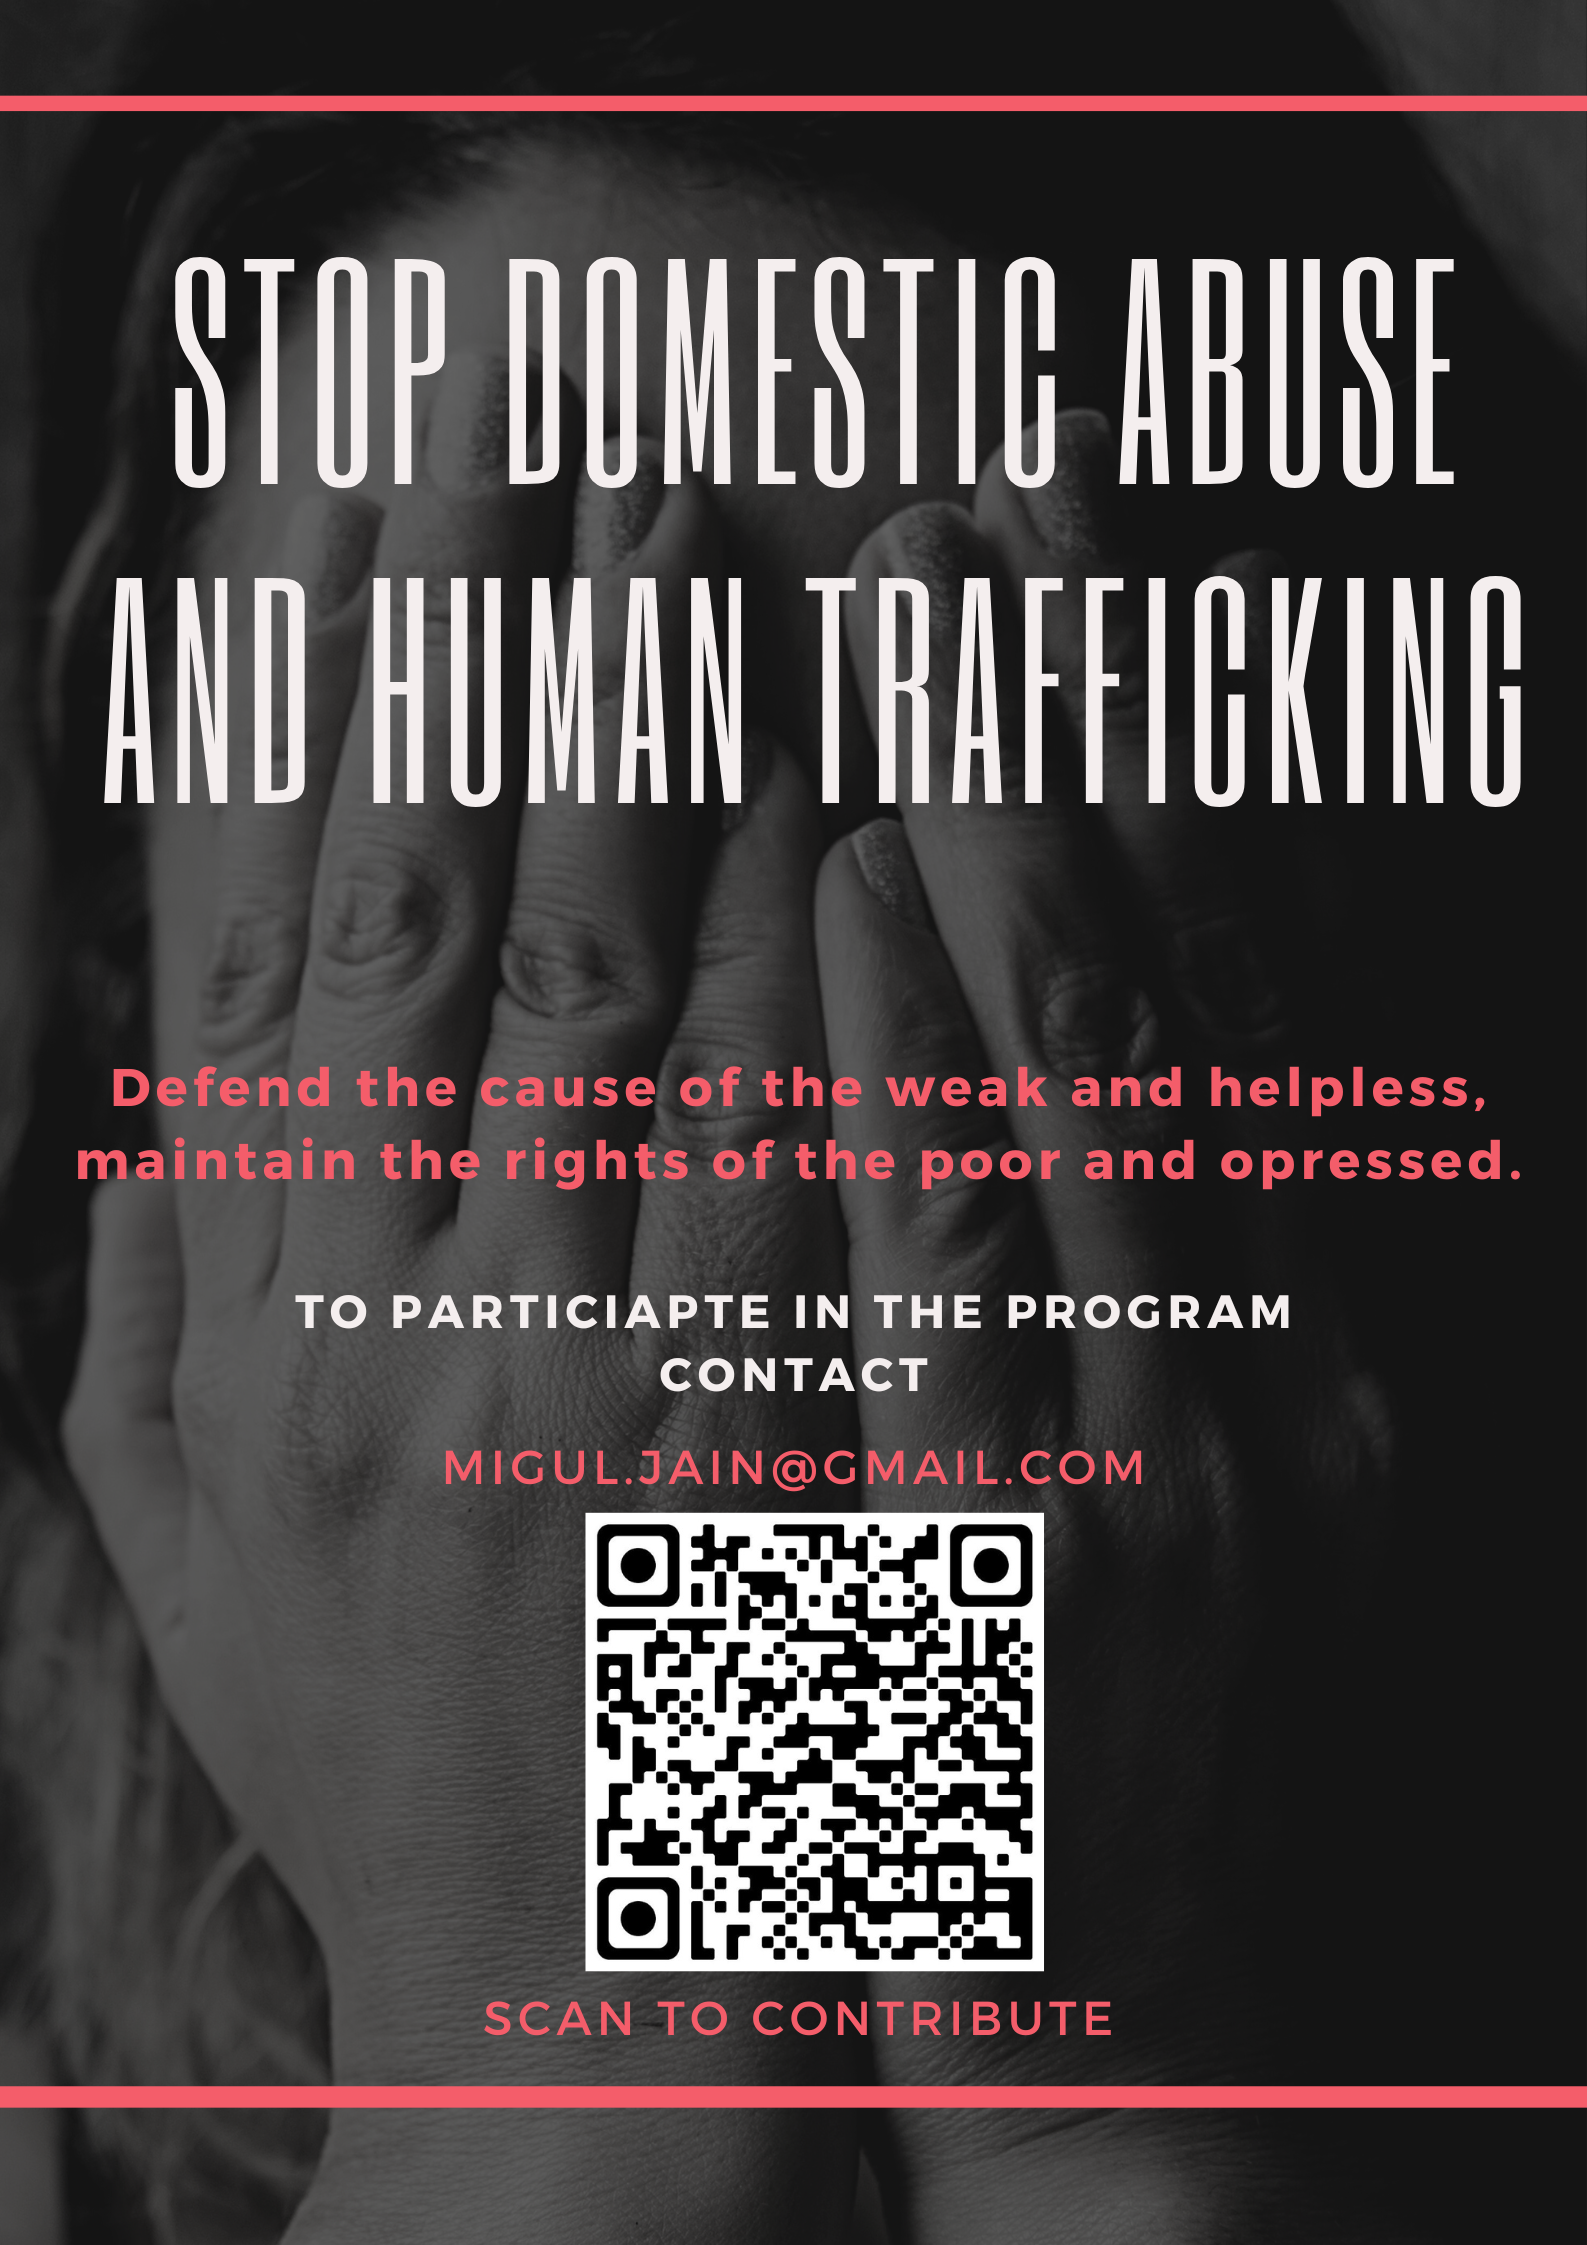 Chaitanya: helping victims of domestic abuse and human trafficking